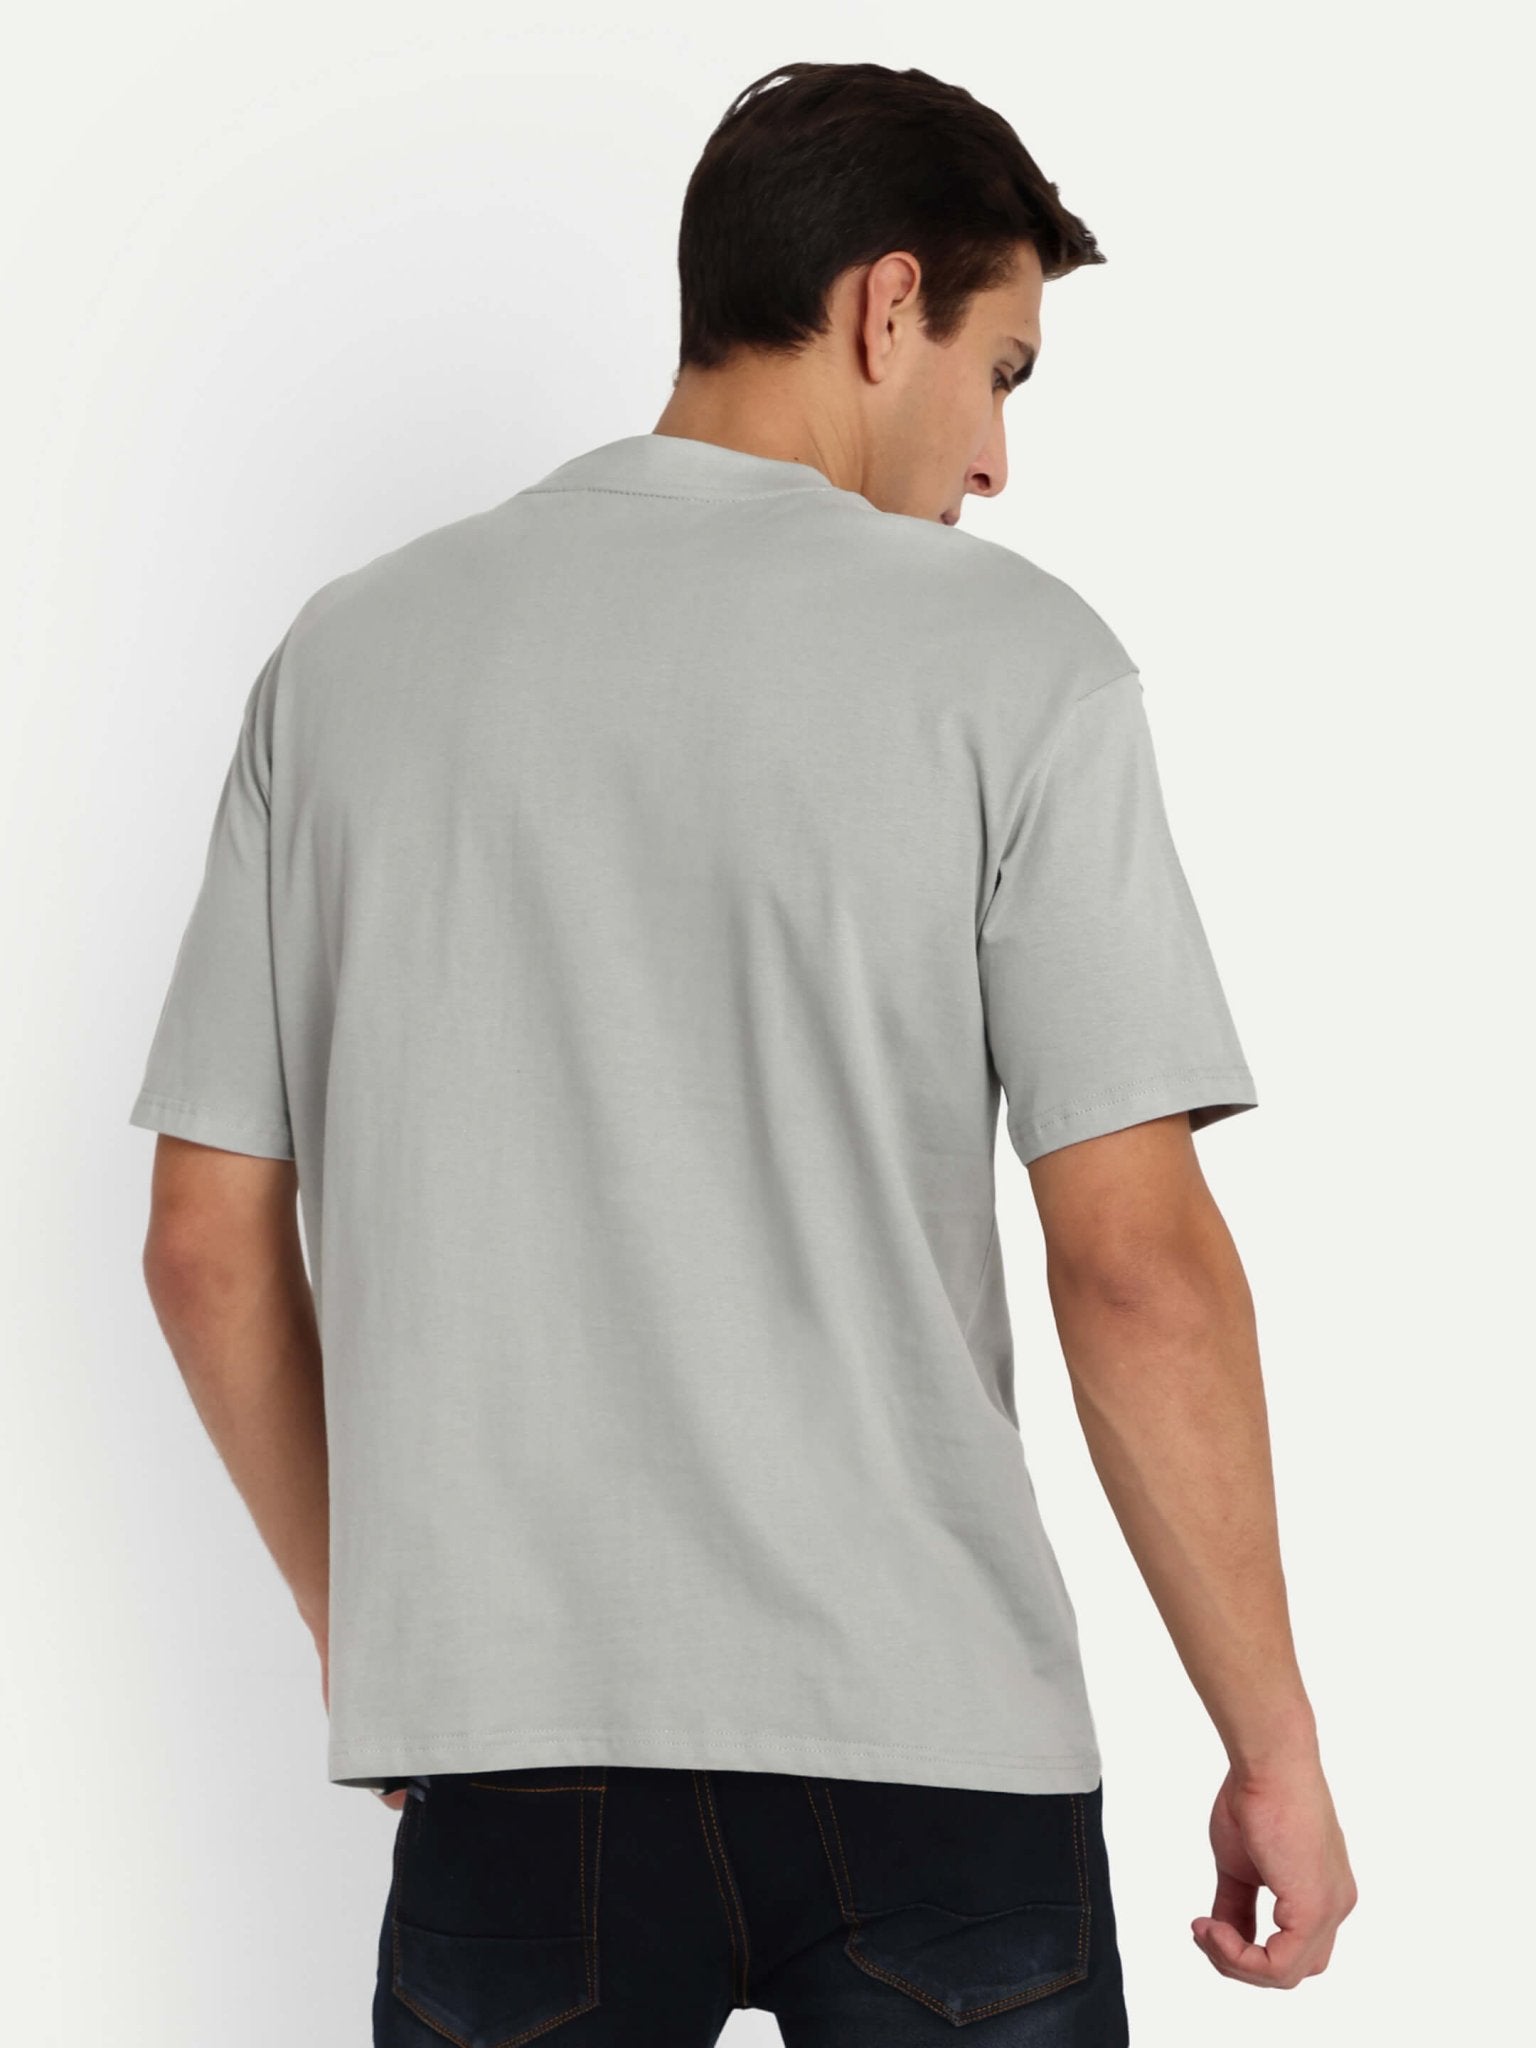 Basic Relaxed T-Shirt Set of 2-180 GSM: LYLG